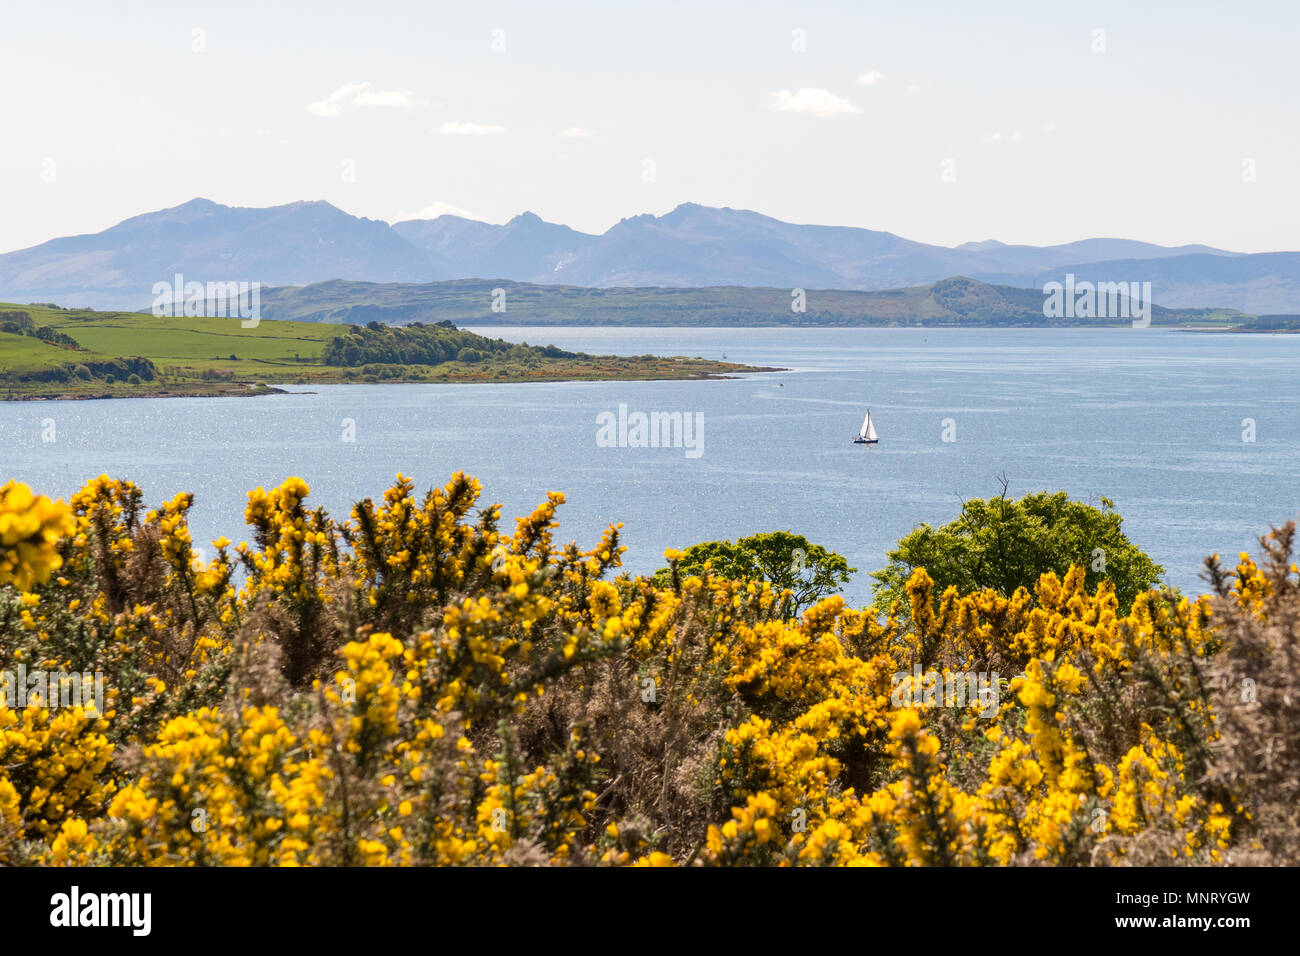 view of Great Cumbrae, Bute and the Isle of Arran across the Firth of Clyde from Largs, North Ayrshire, Scotland, UK Stock Photo